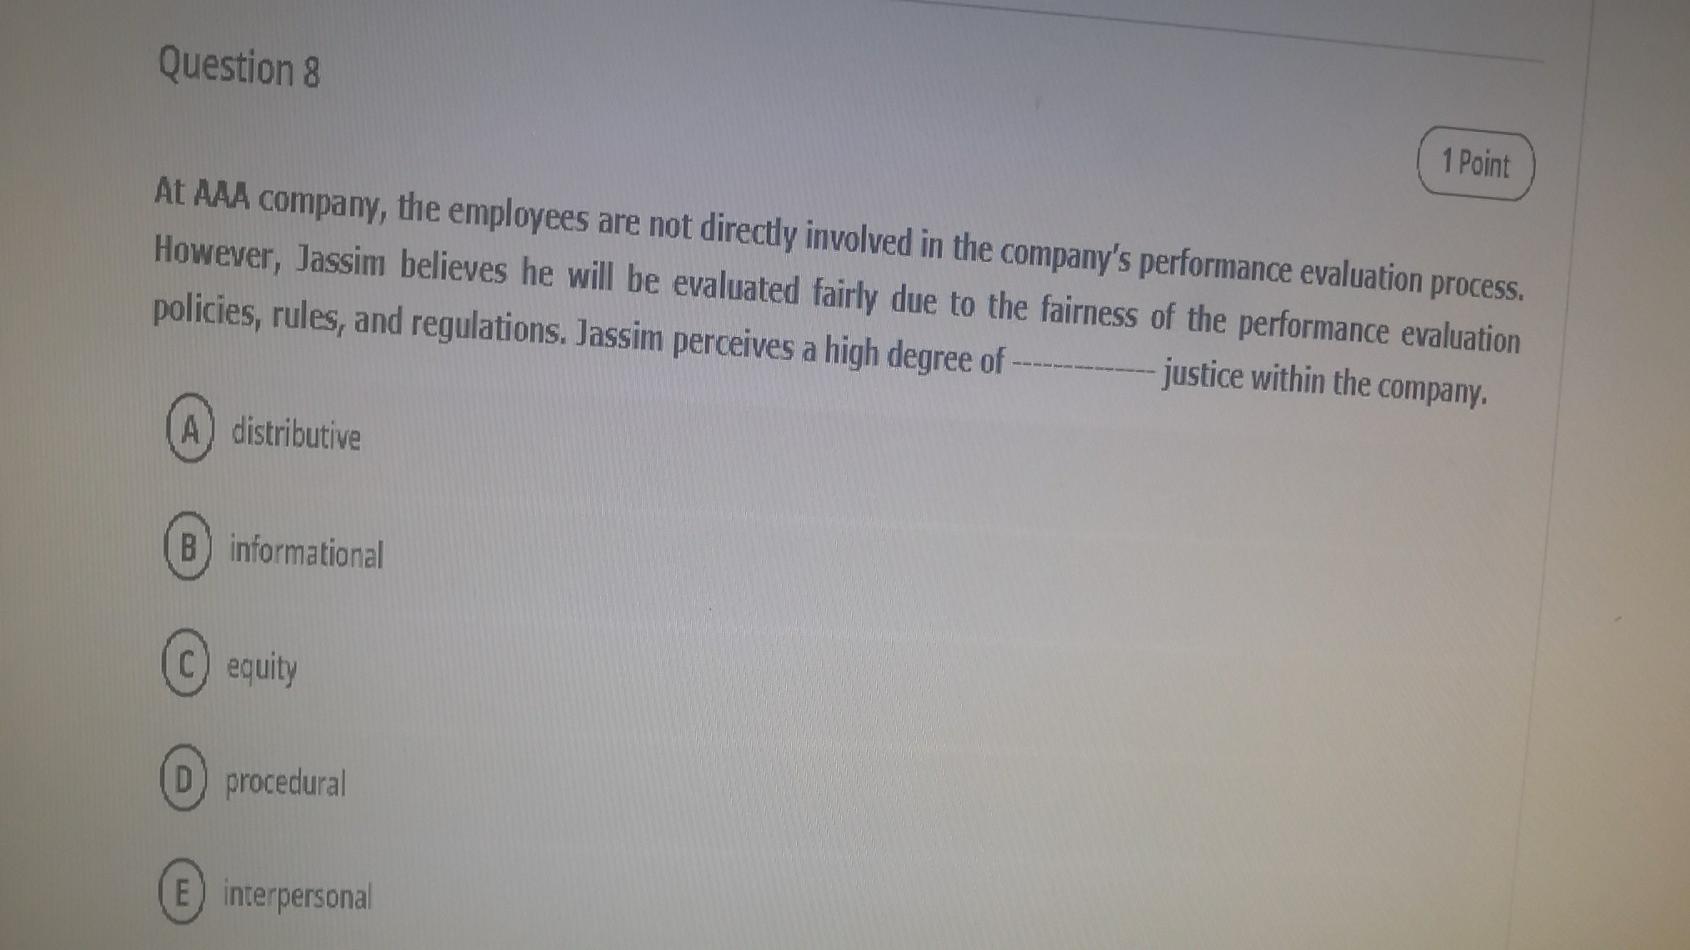 Question 8
1 Point
At AAA company, the employees are not directly involved in the companys performance evaluation process.
H